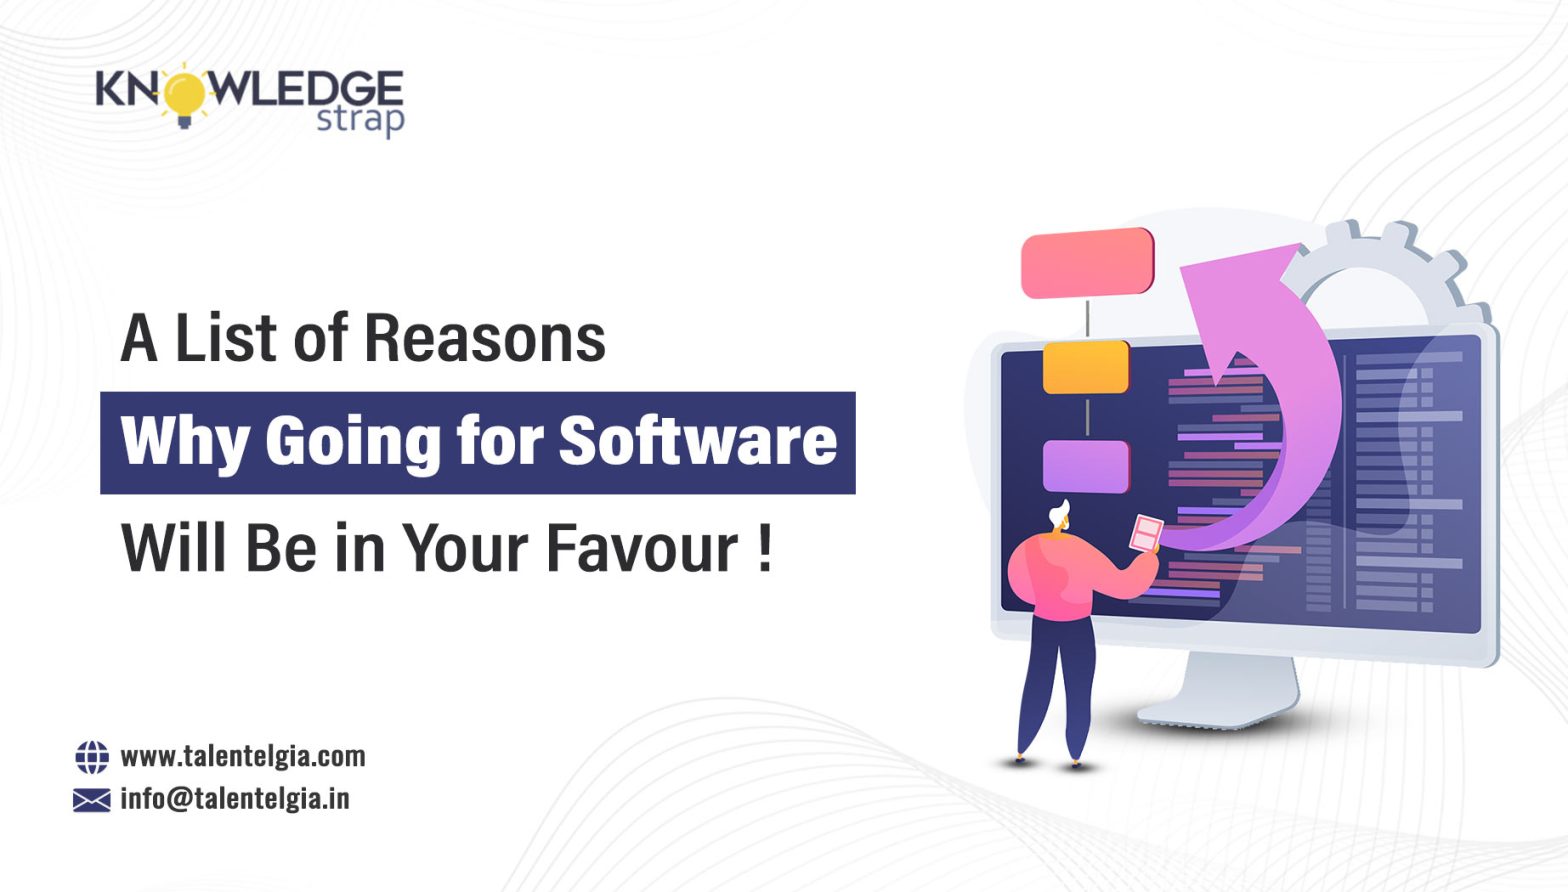 A List of Reasons Why Going for Software Will Be in Your Favour!